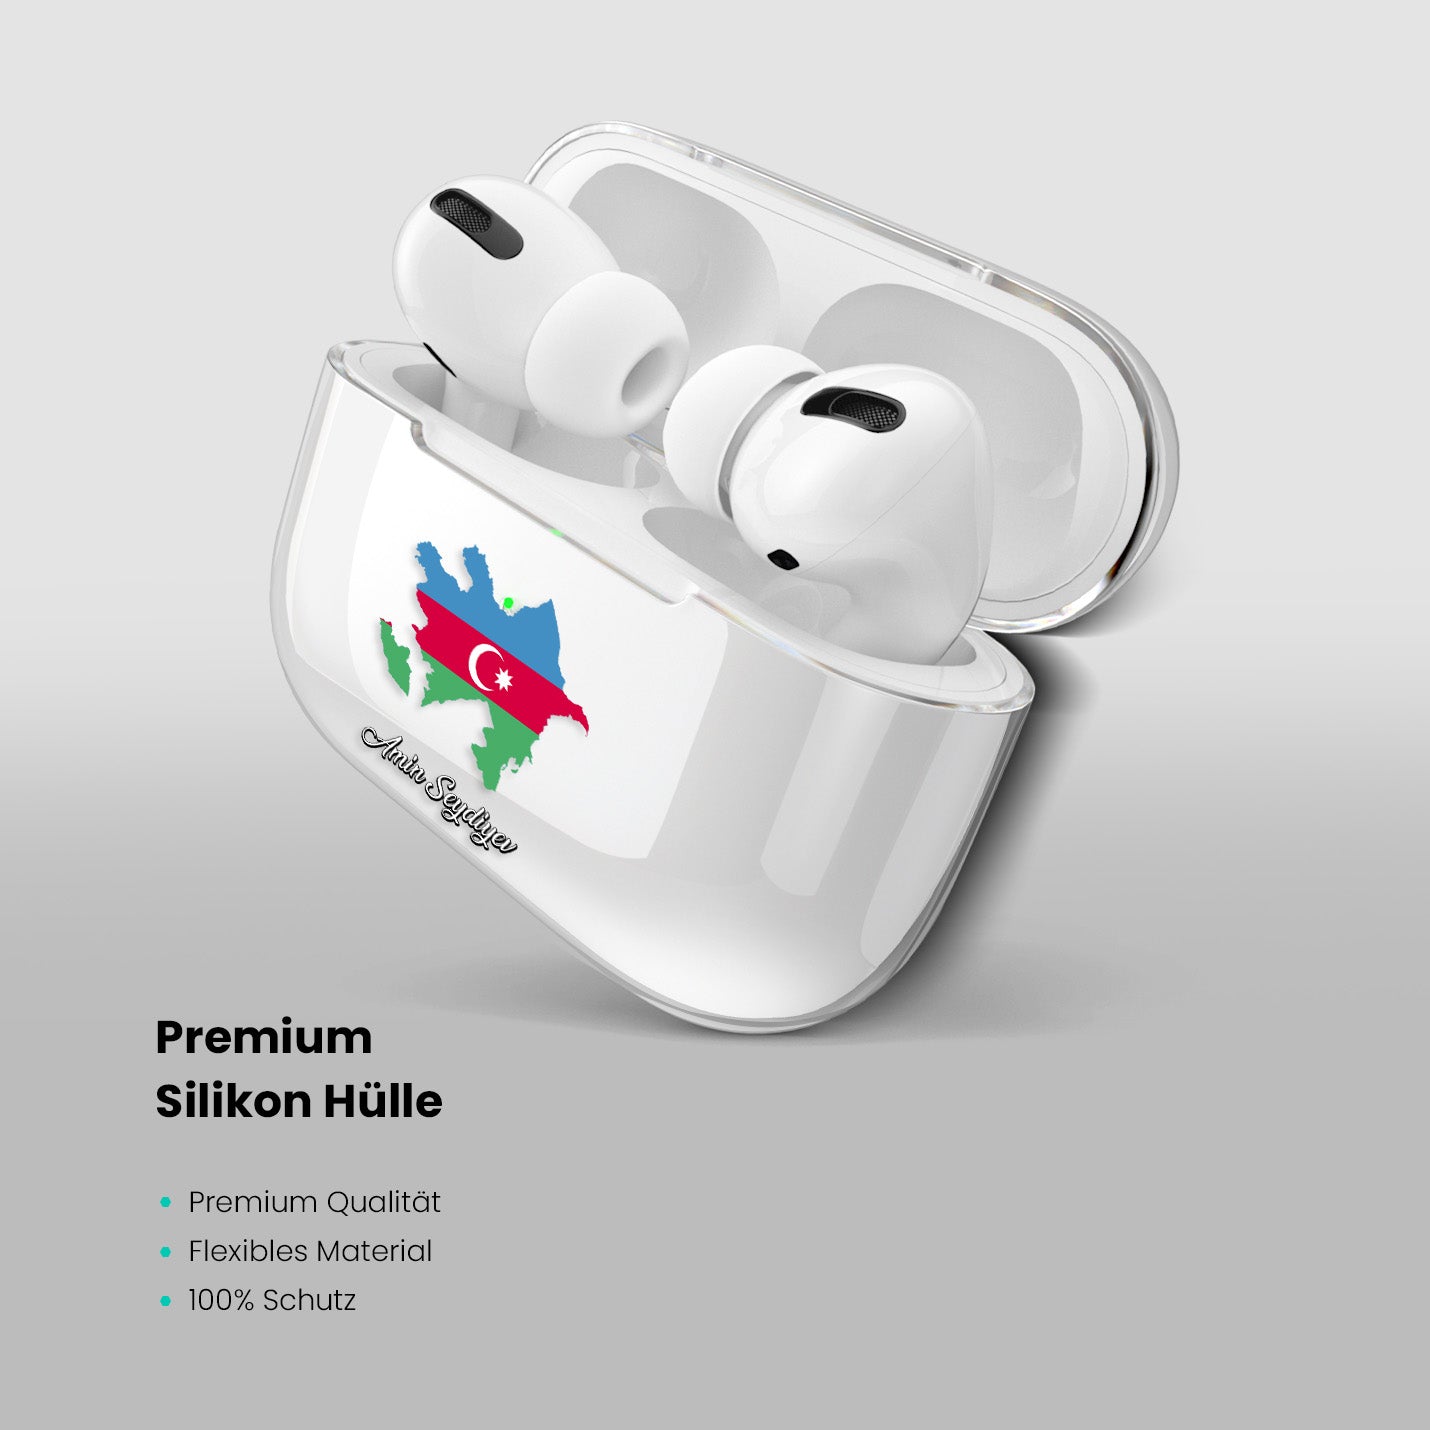 Airpods Hülle - Aserbaidschan Flagge - 1instaphone